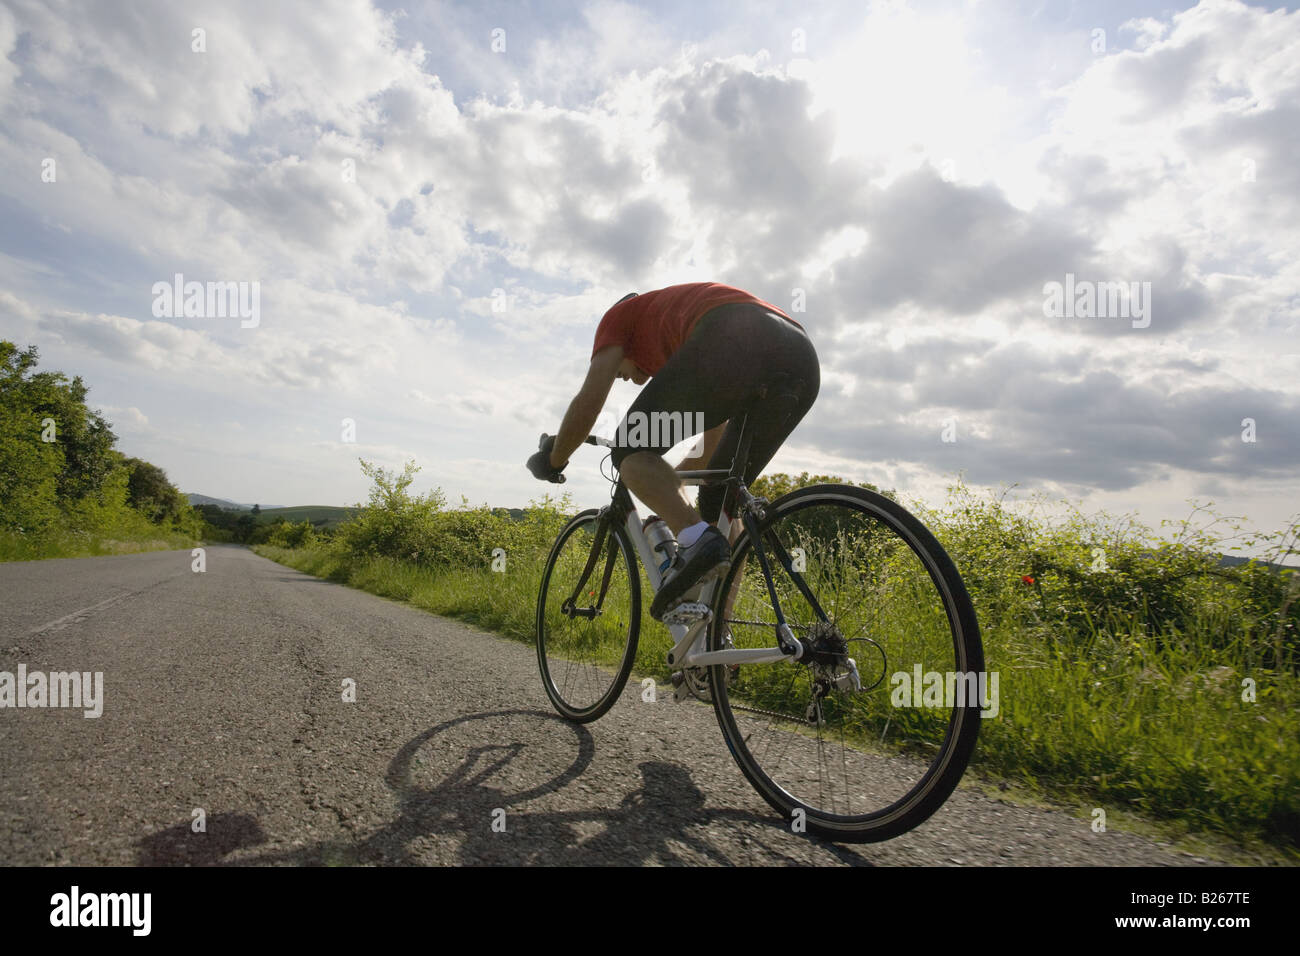 Rear view of a man cycling on road with cloudy sky Stock Photo